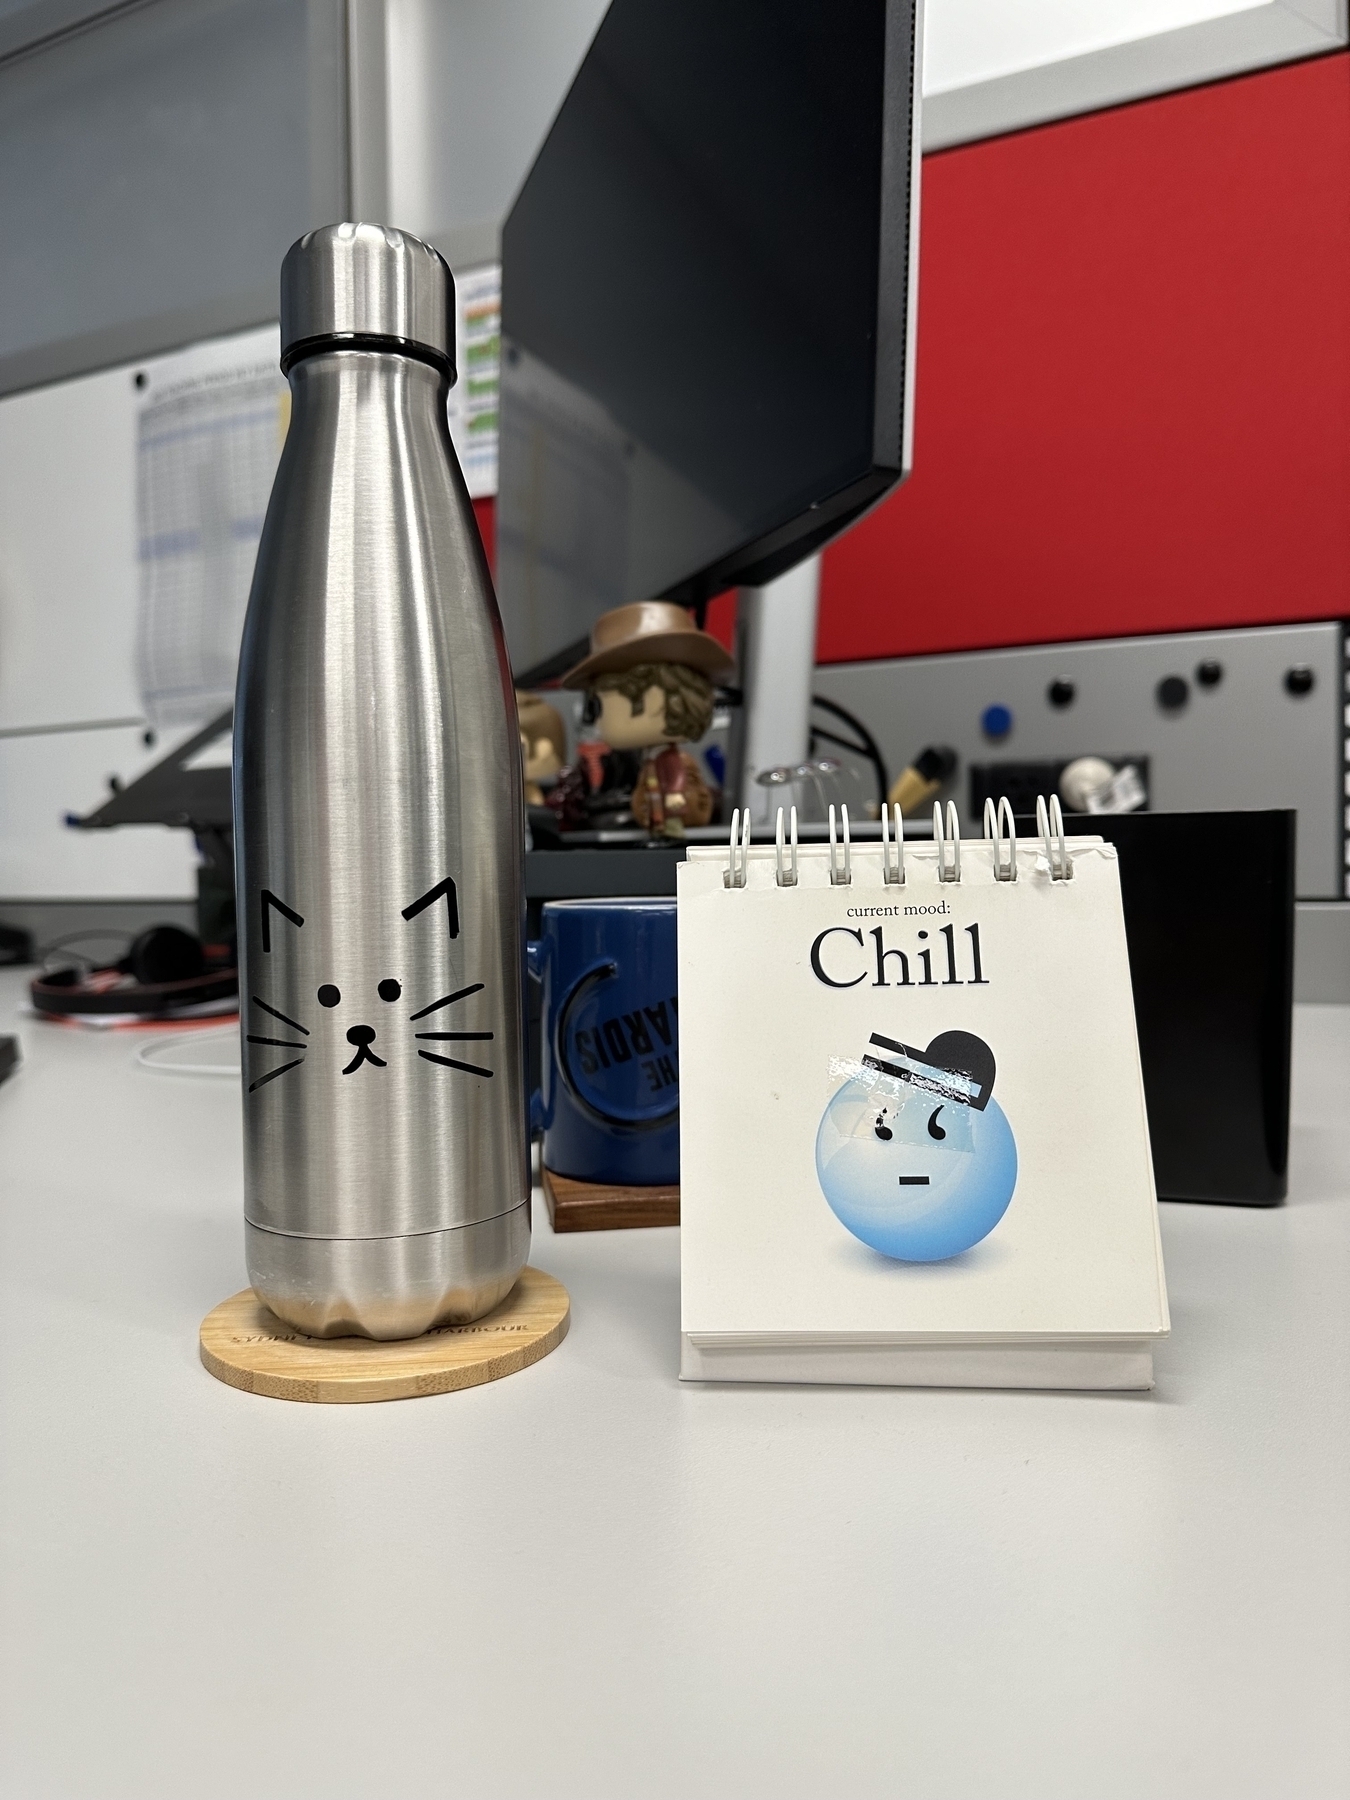 Side on view of a desk. Sitting on the desk is a silver metal drink bottle with a sticker showing the face of a cat. Beside that is a white card saying “chill” above a smiling blue emoji face. Behind is a computer stand and monitor.